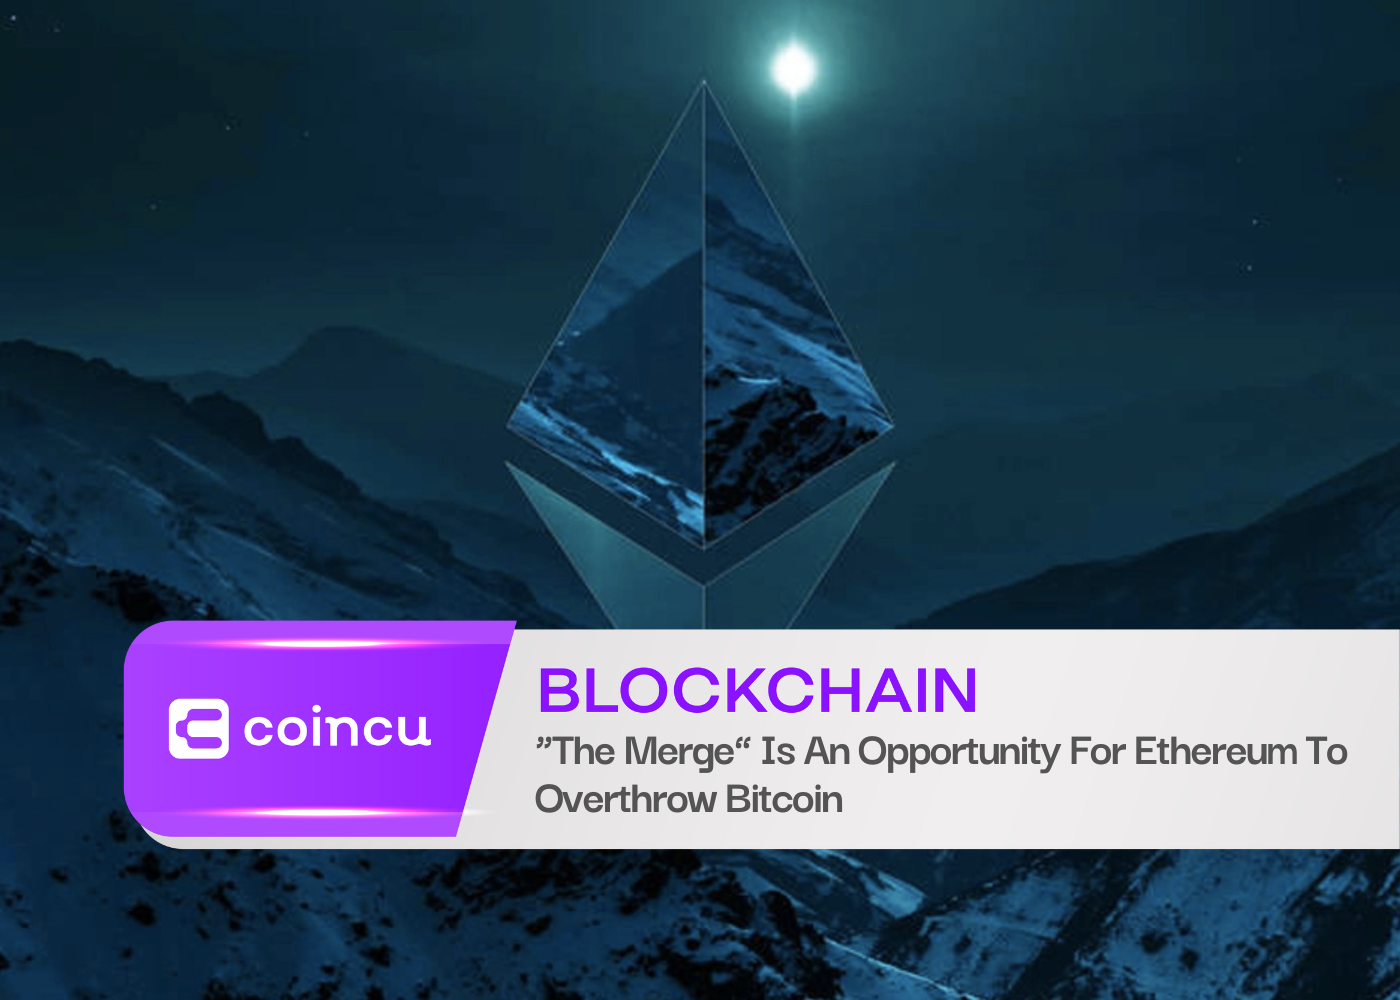 “The Merge” Is An Opportunity For Ethereum To Overthrow Bitcoin